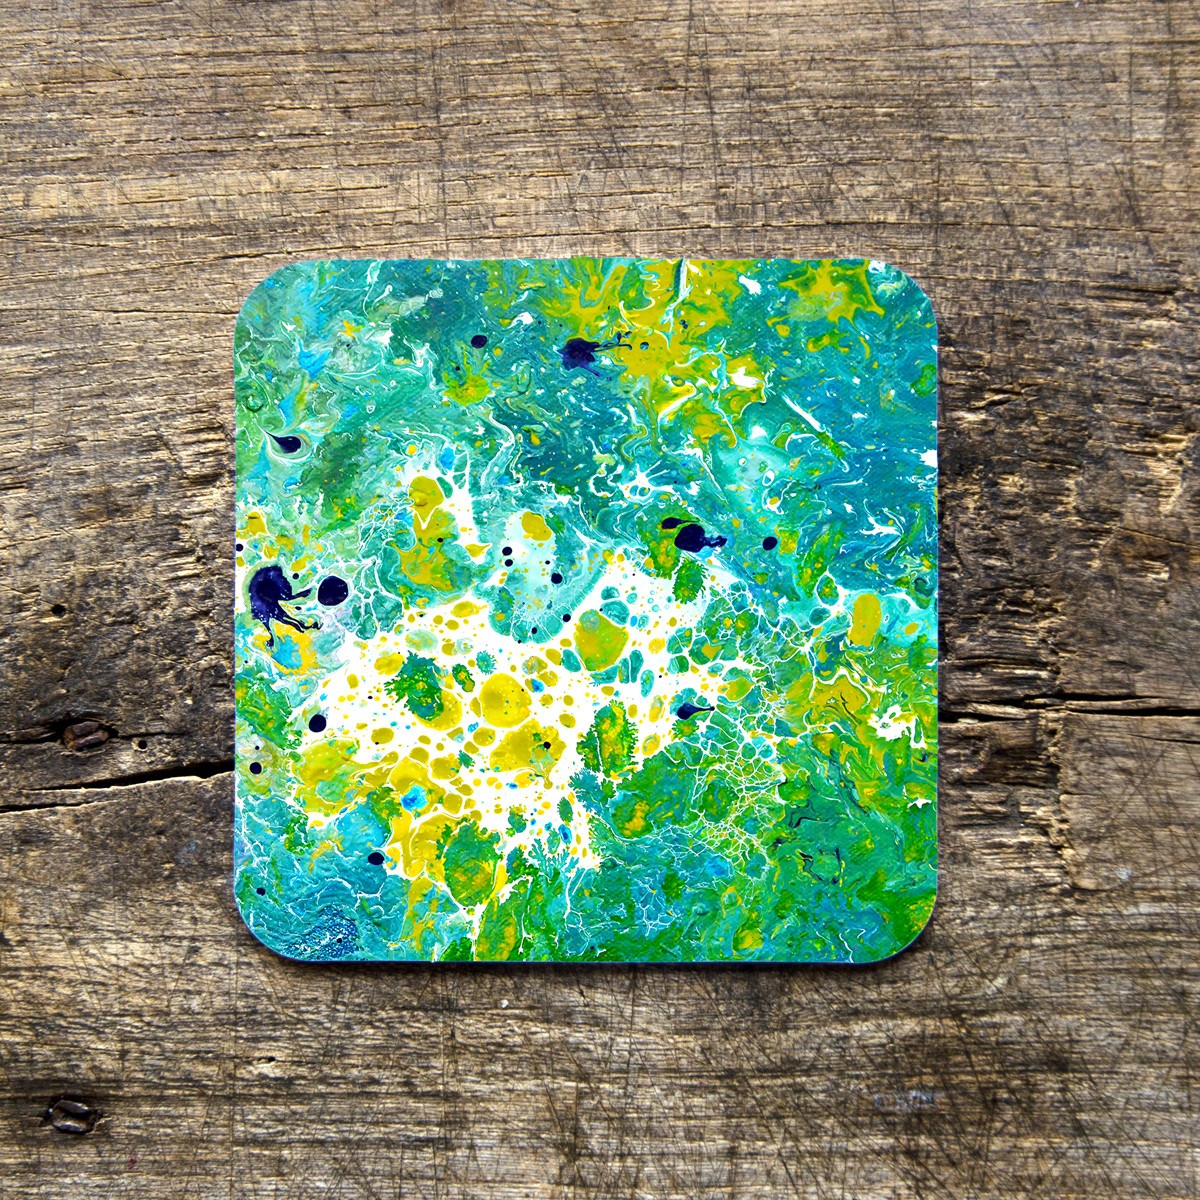 Teal & Green Coasters - Louise Mead